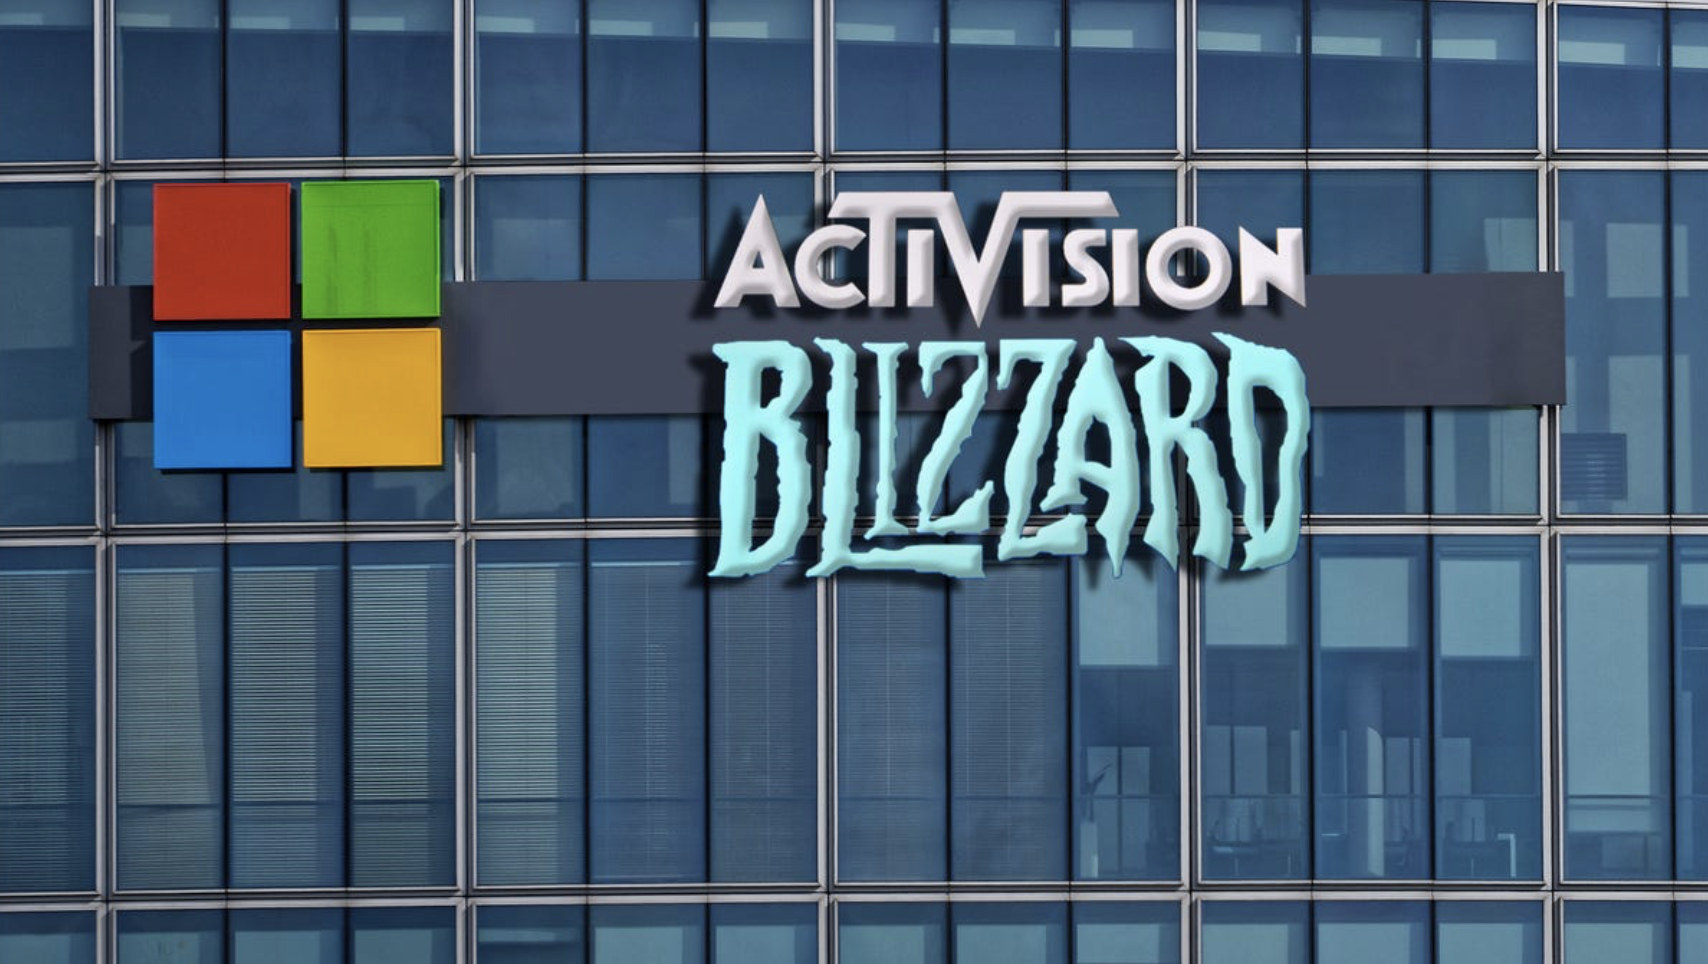 Microsoft Eliminates 1,900 Activision Blizzard and Xbox Employees Nearly 8% of their Entire Workforce